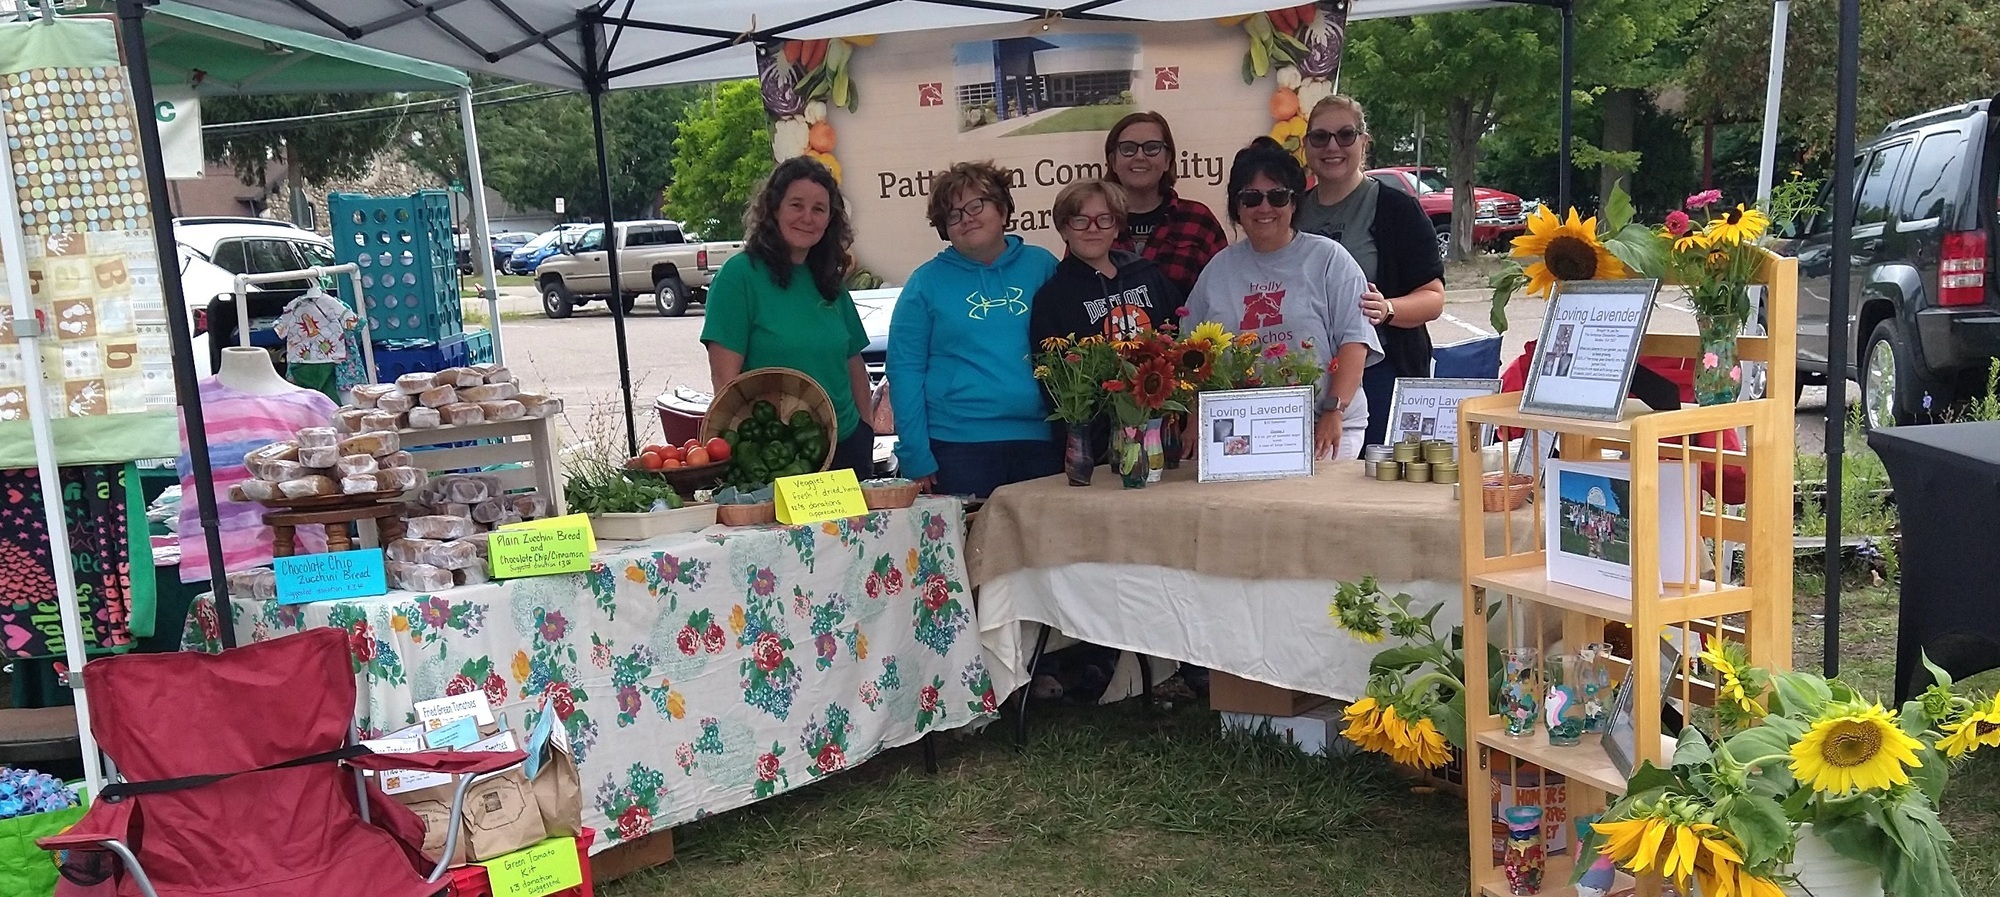 Patterson Community Garden stand at the Farmer's Market